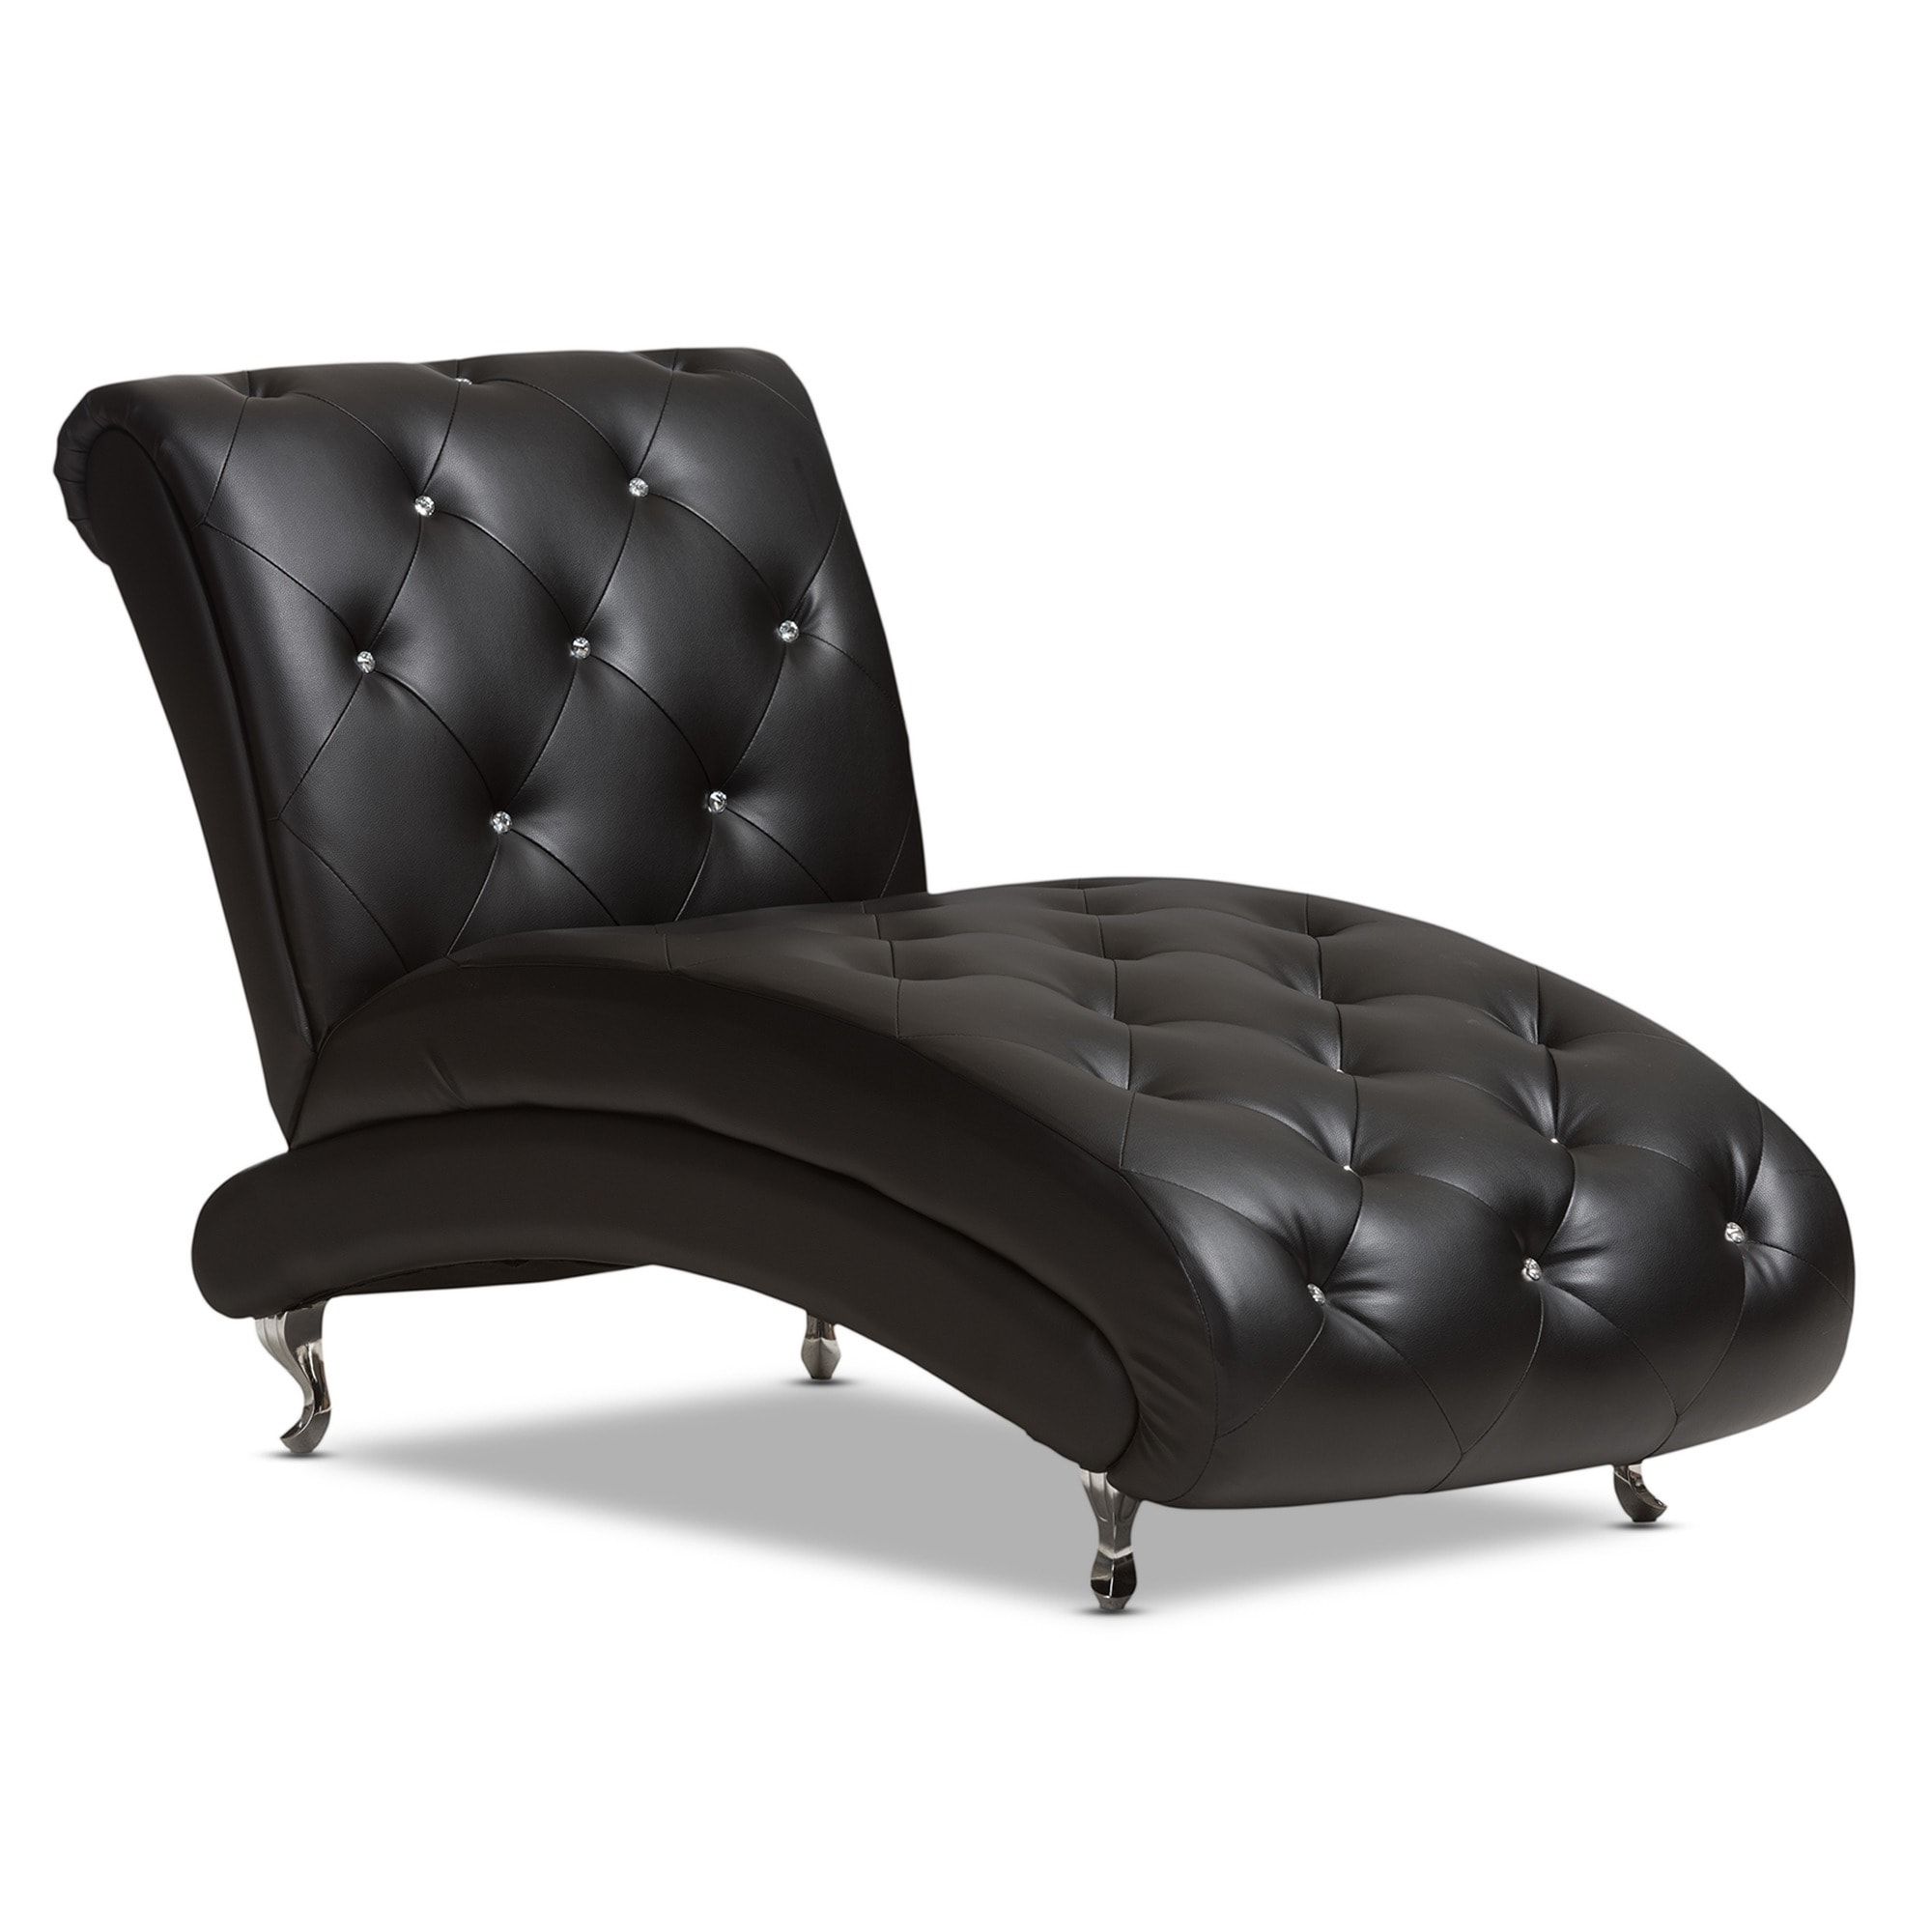 Black Chaise Lounges Pertaining To Most Current Baxton Studio Pease Contemporary Black Faux Leather Crystal Tufted (View 7 of 15)